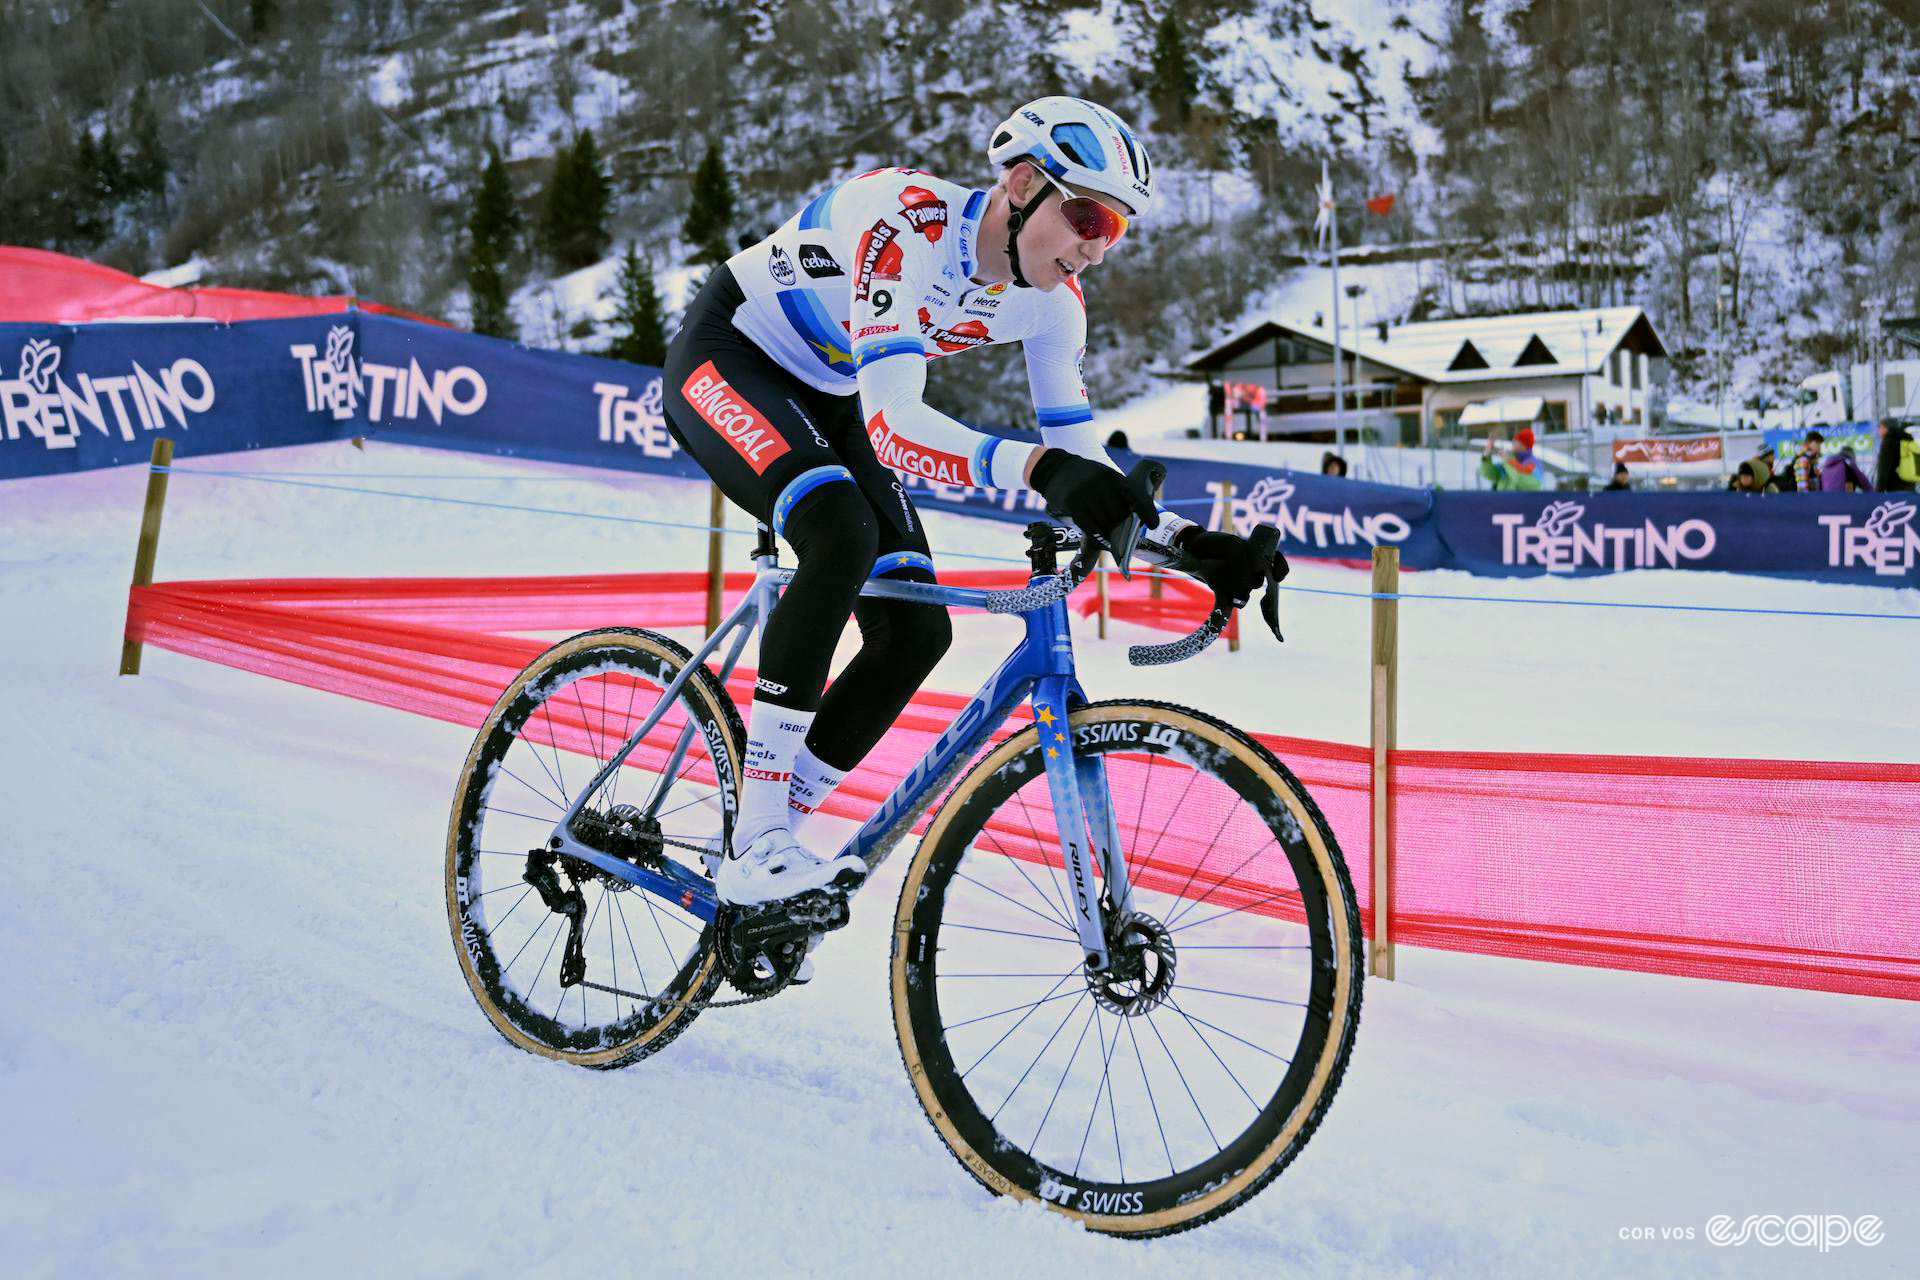 Michael Vanthourenhout in the European champion's jersey during UCI Cyclocross World Cup Val di Sole.